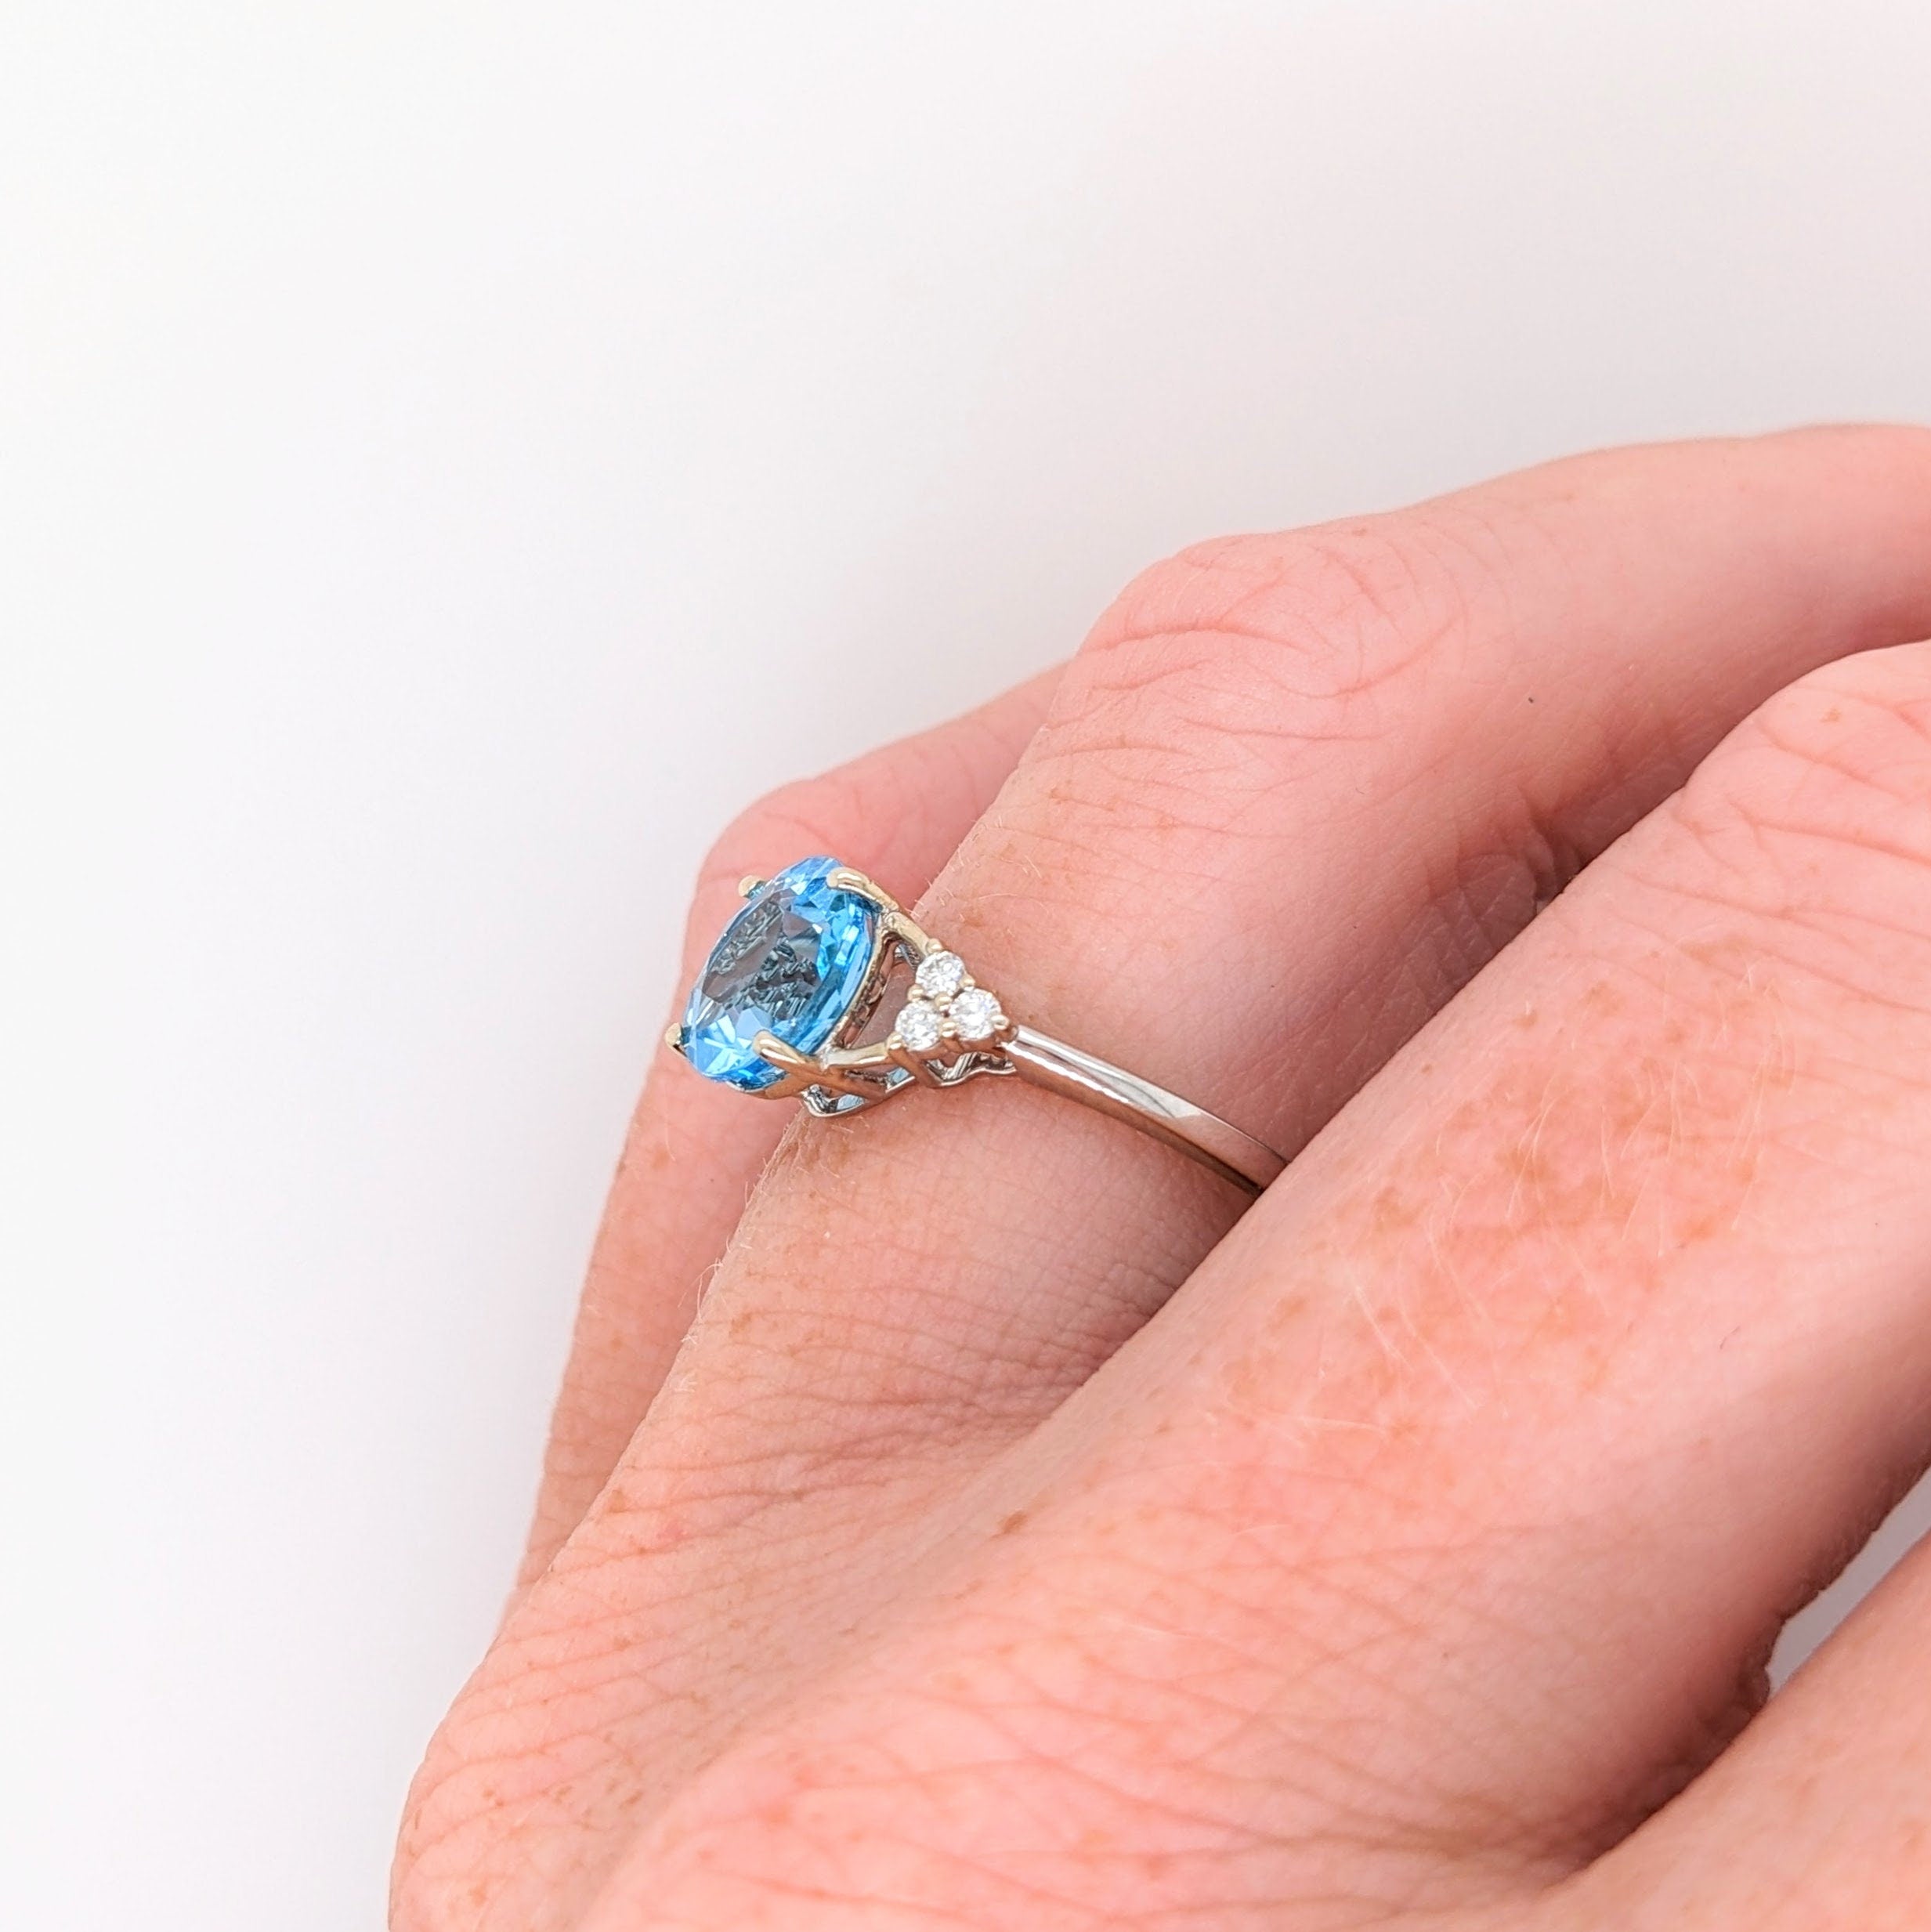 Statement Rings-Brilliant Blue Swiss Topaz Ring in Solid 14K White Gold w Diamond Accented Band | Round 8mm | Textured Shank | December Birthstone - NNJGemstones